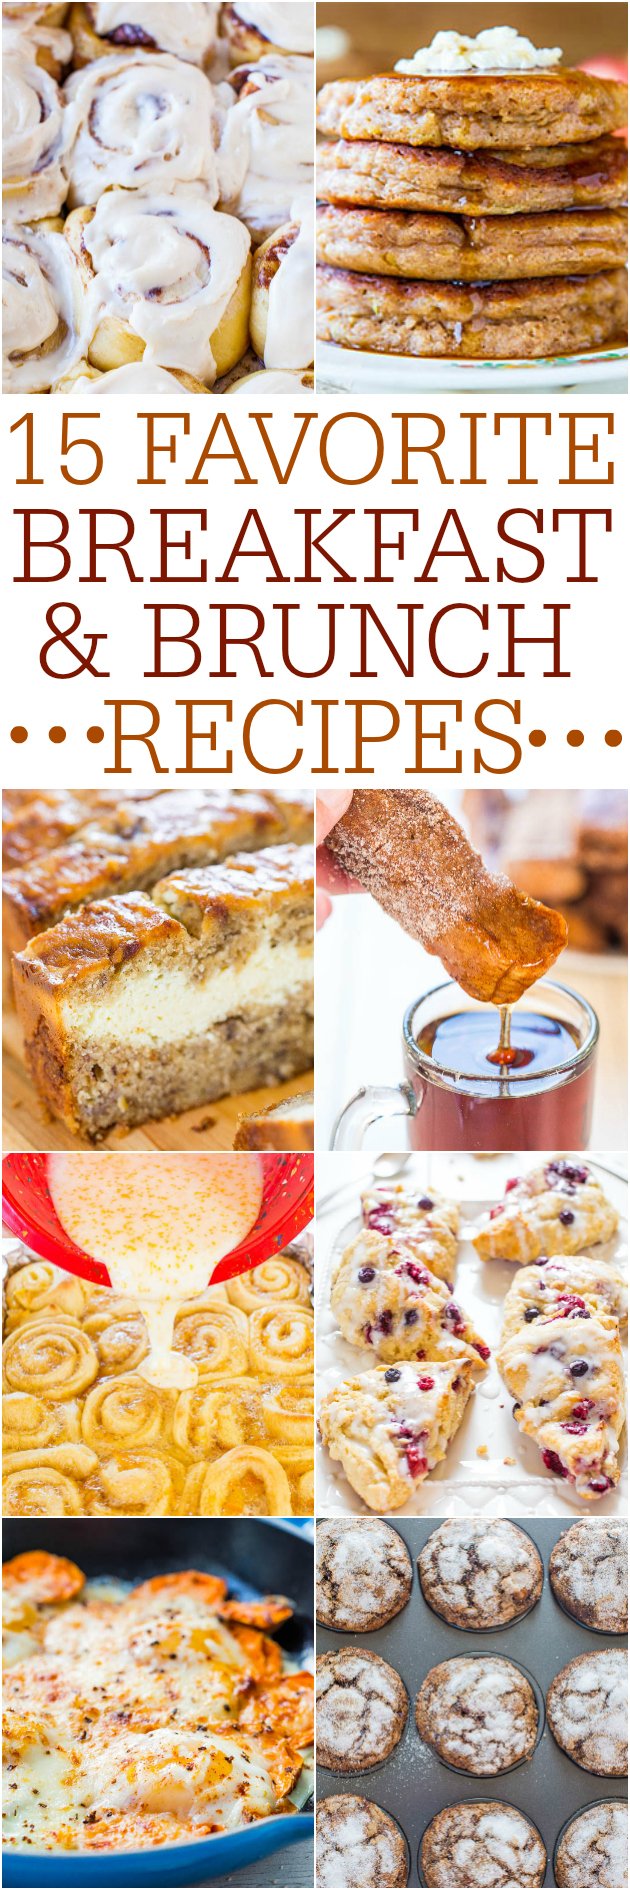 15 Favorite Breakfast and Brunch Recipes - Fast and easy tried-and-true recipes that everyone will love! 